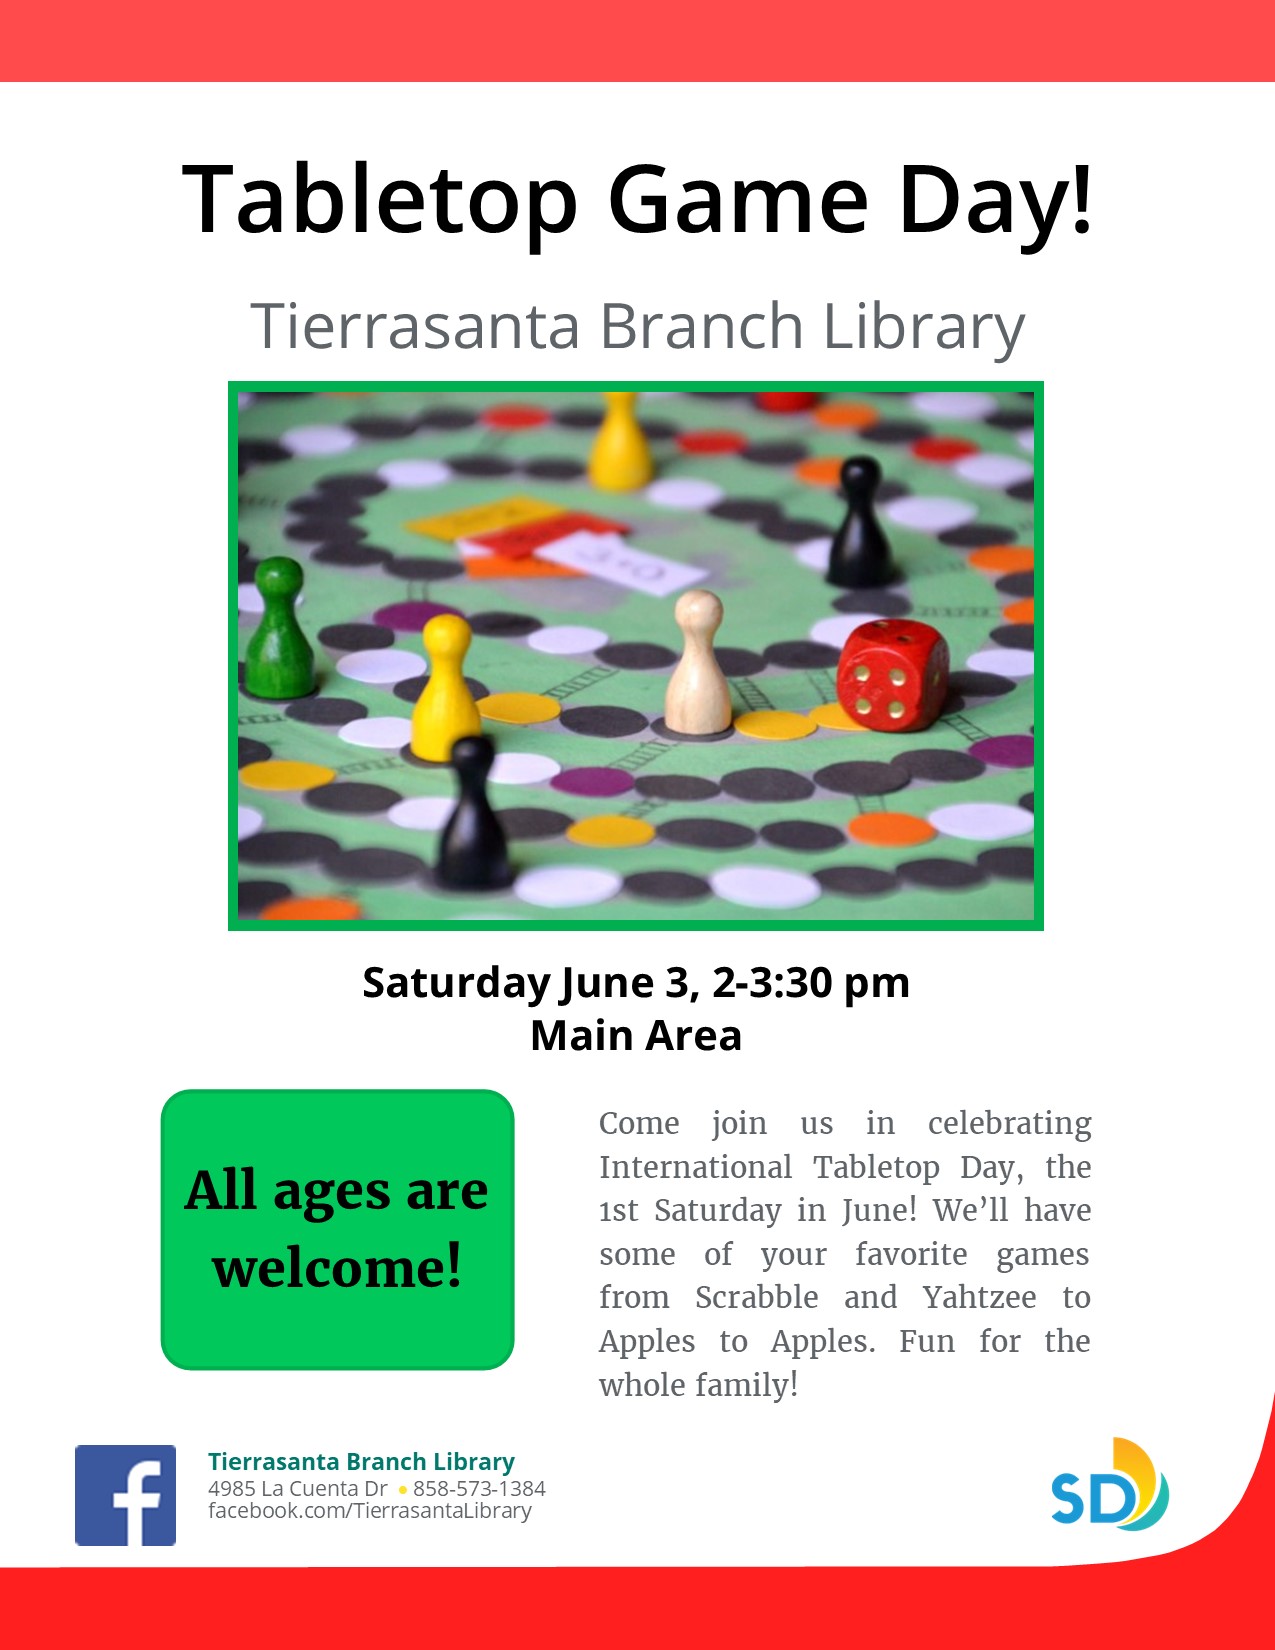 Flyer with the image of a colorful board game with pieces